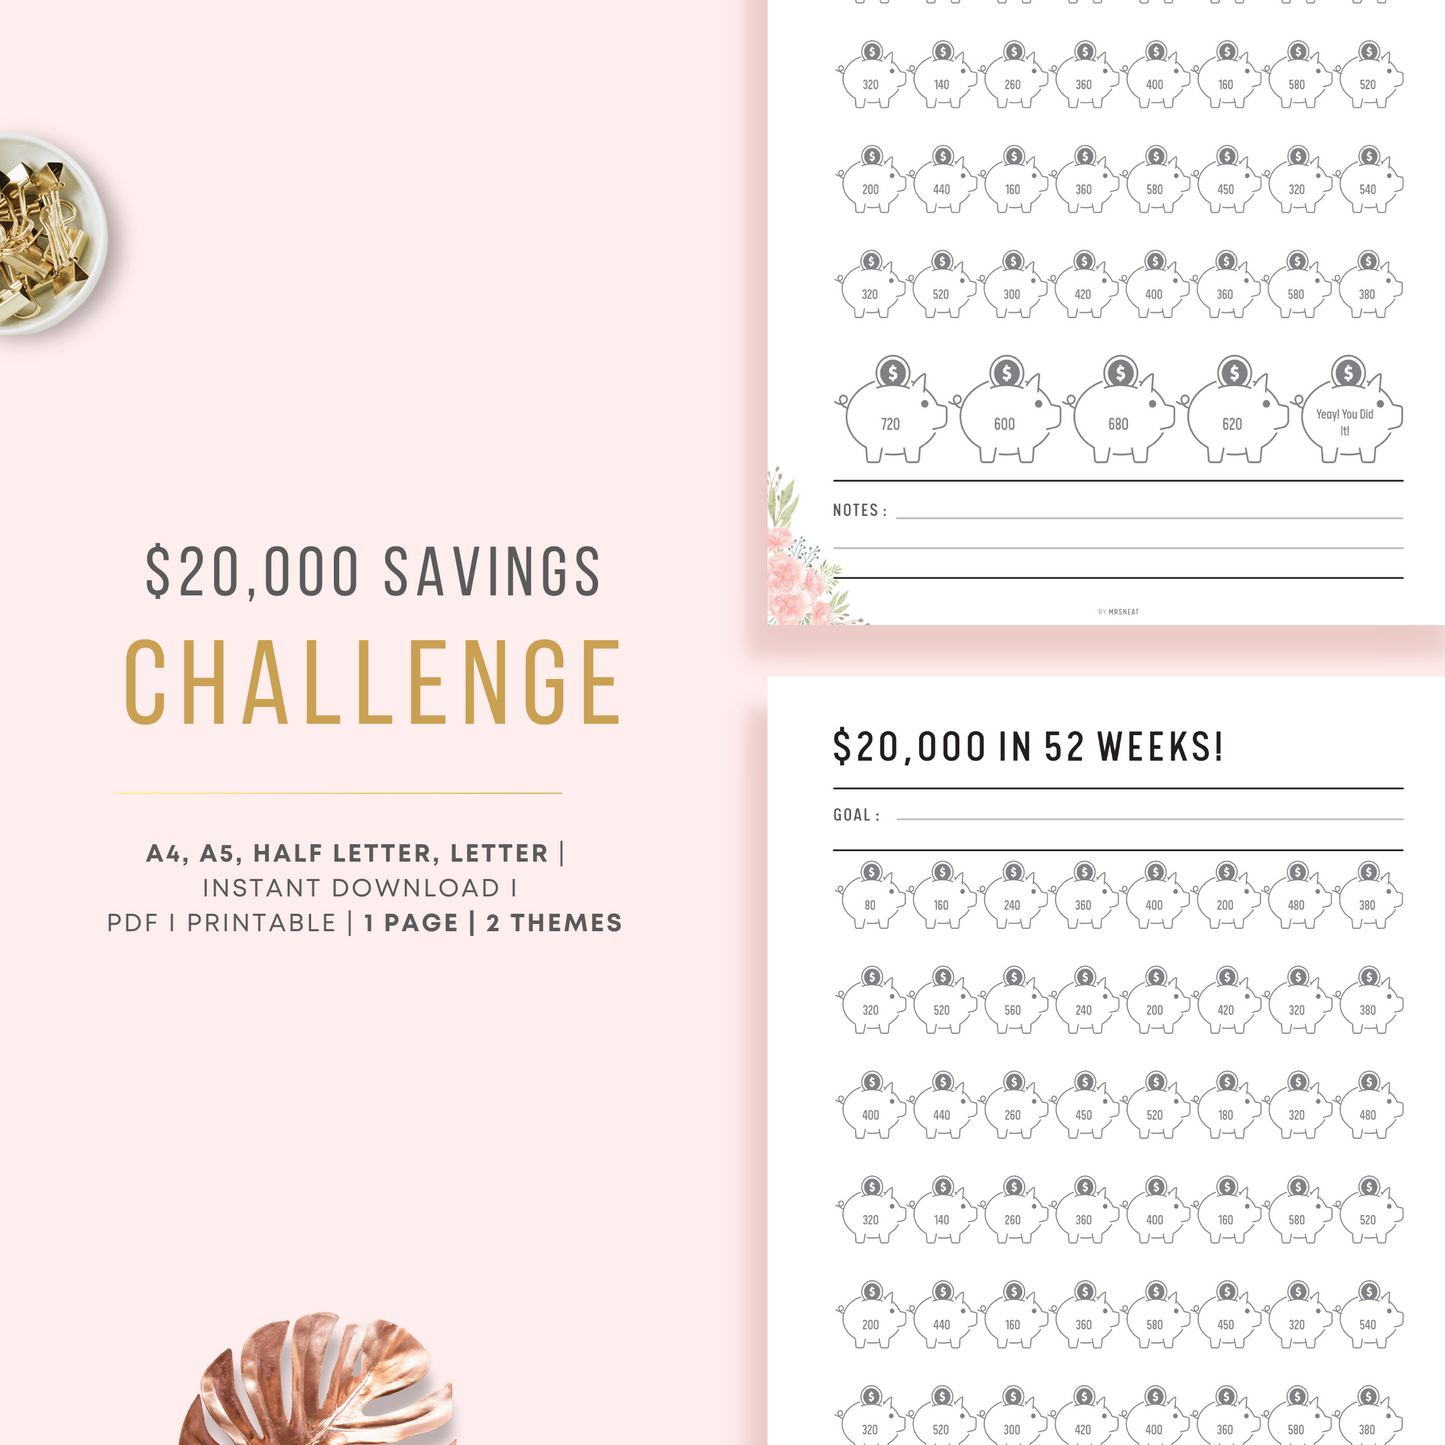 $20,000 Savings Challenge Planner in Neutral and Floral Themes with room for goal and notes